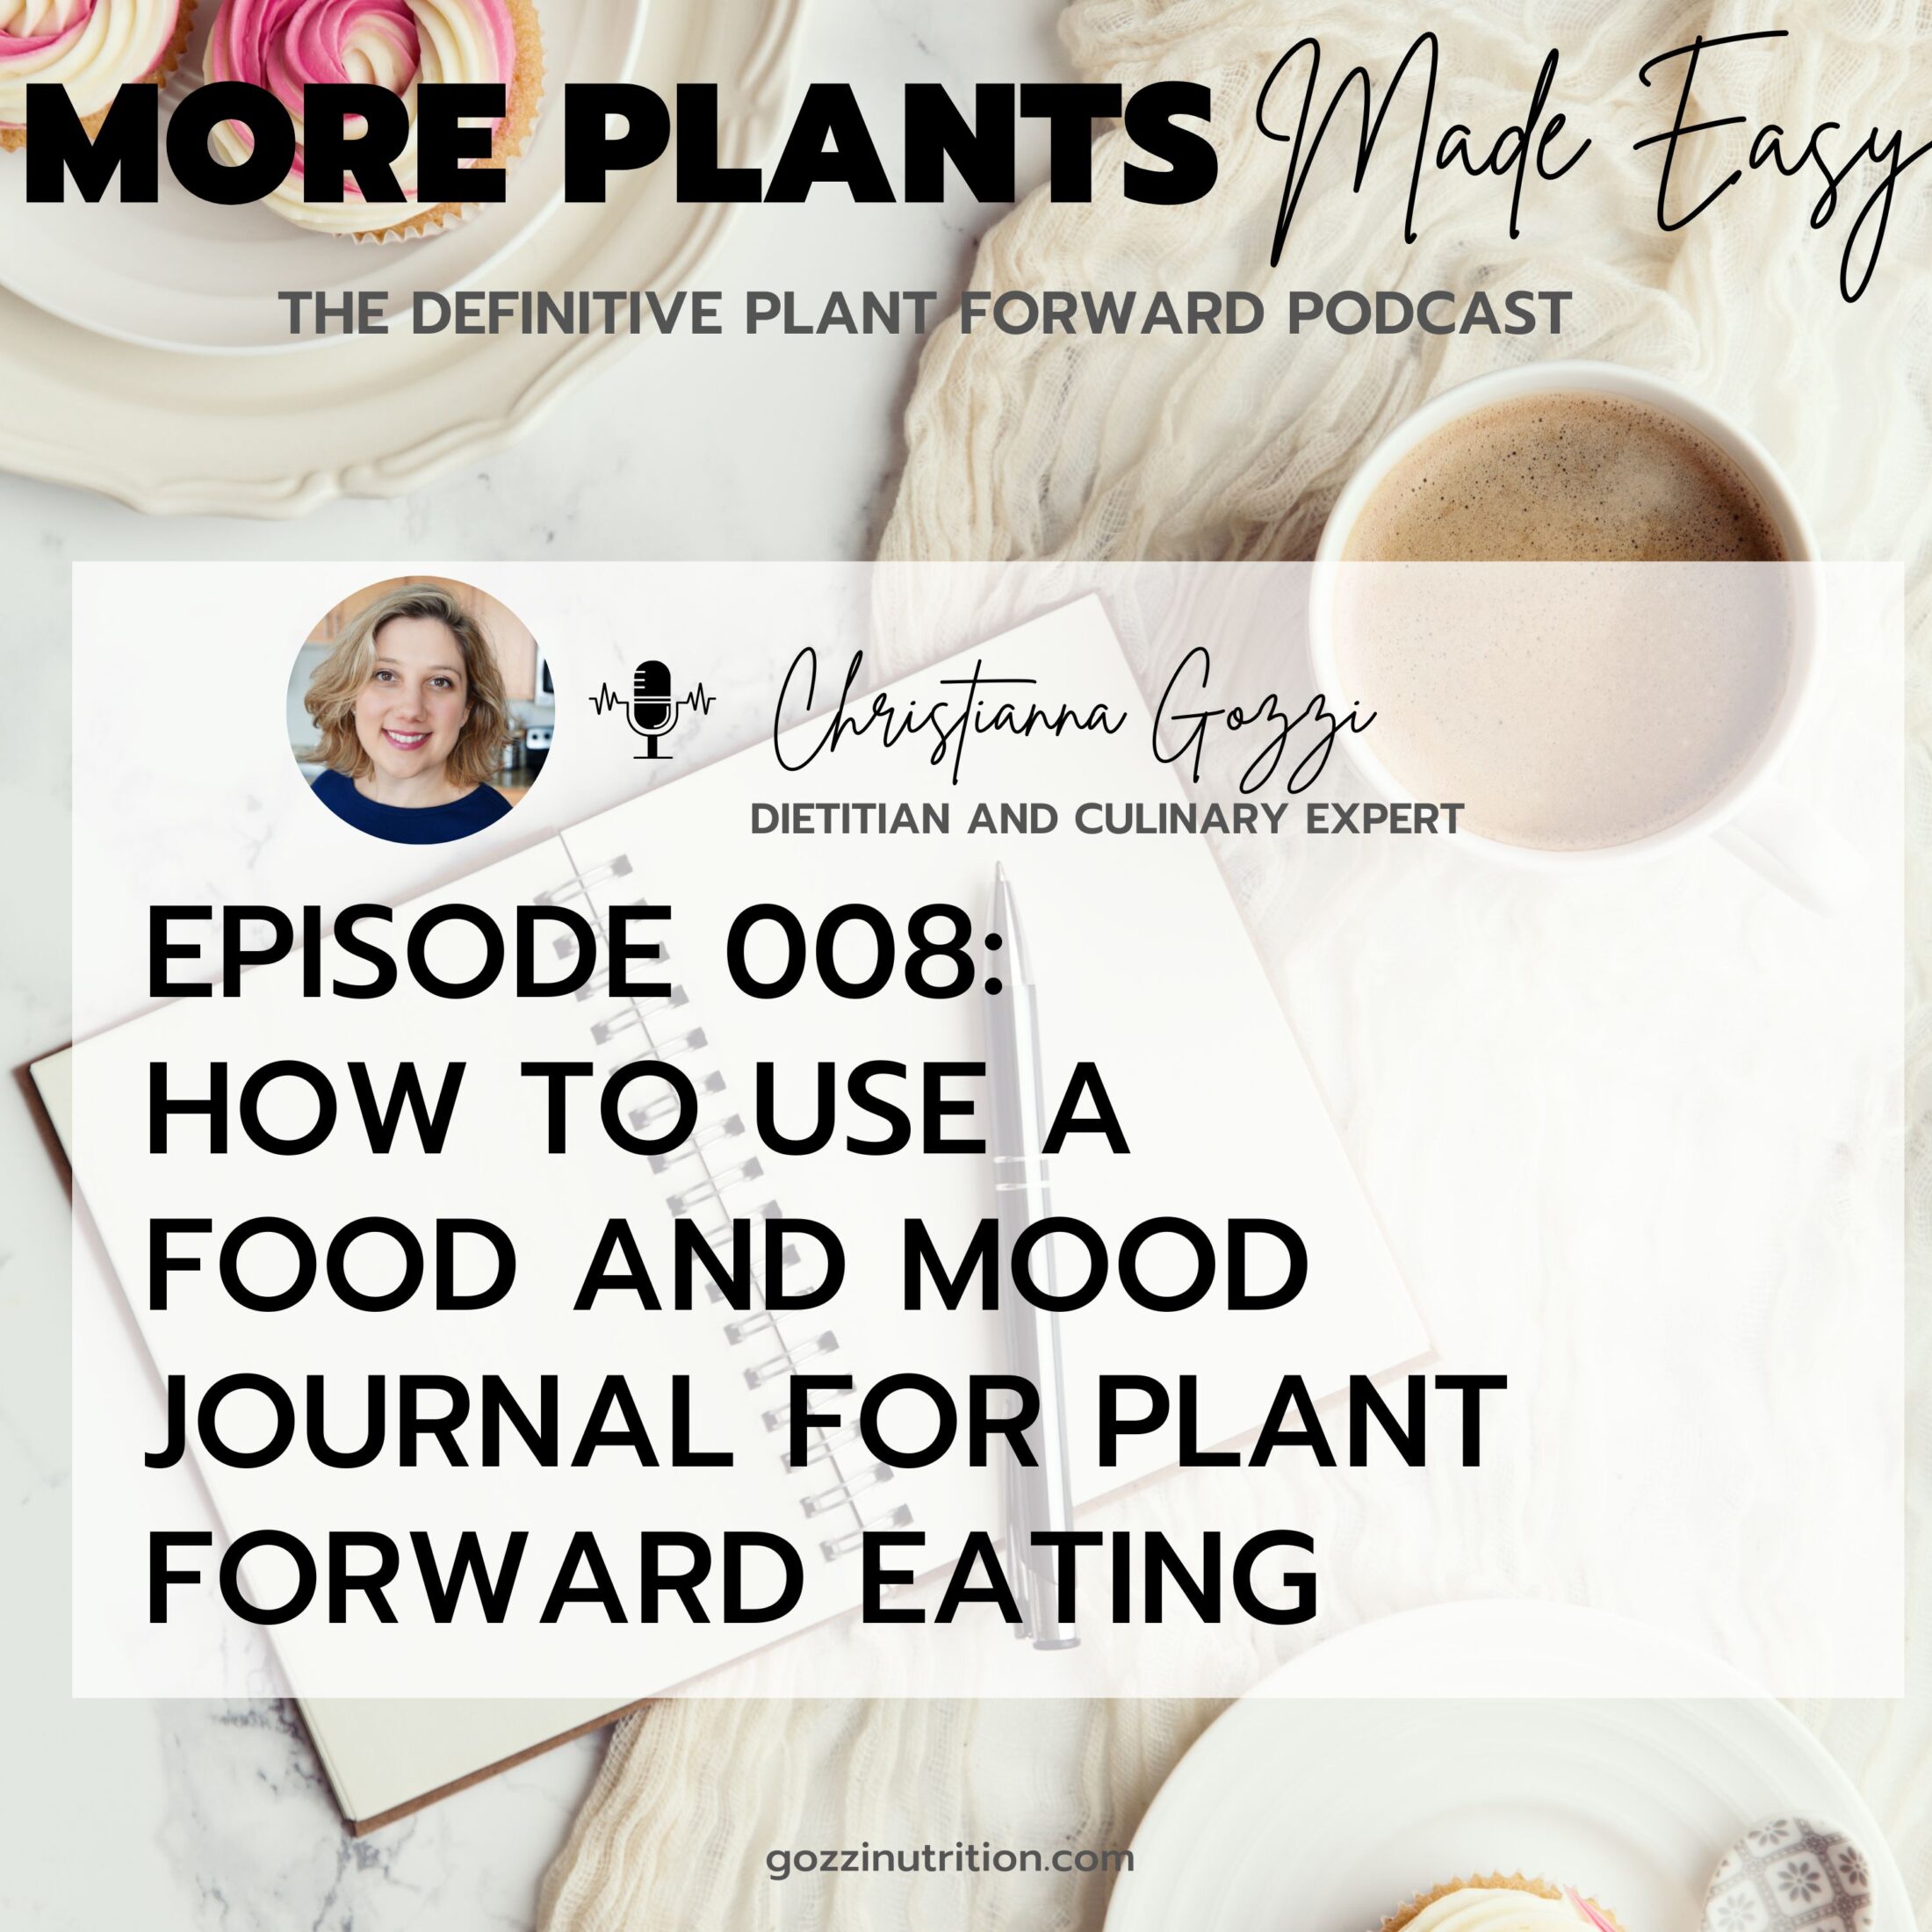 cover image depicting a food and mood journal for the more plants made easy podcast